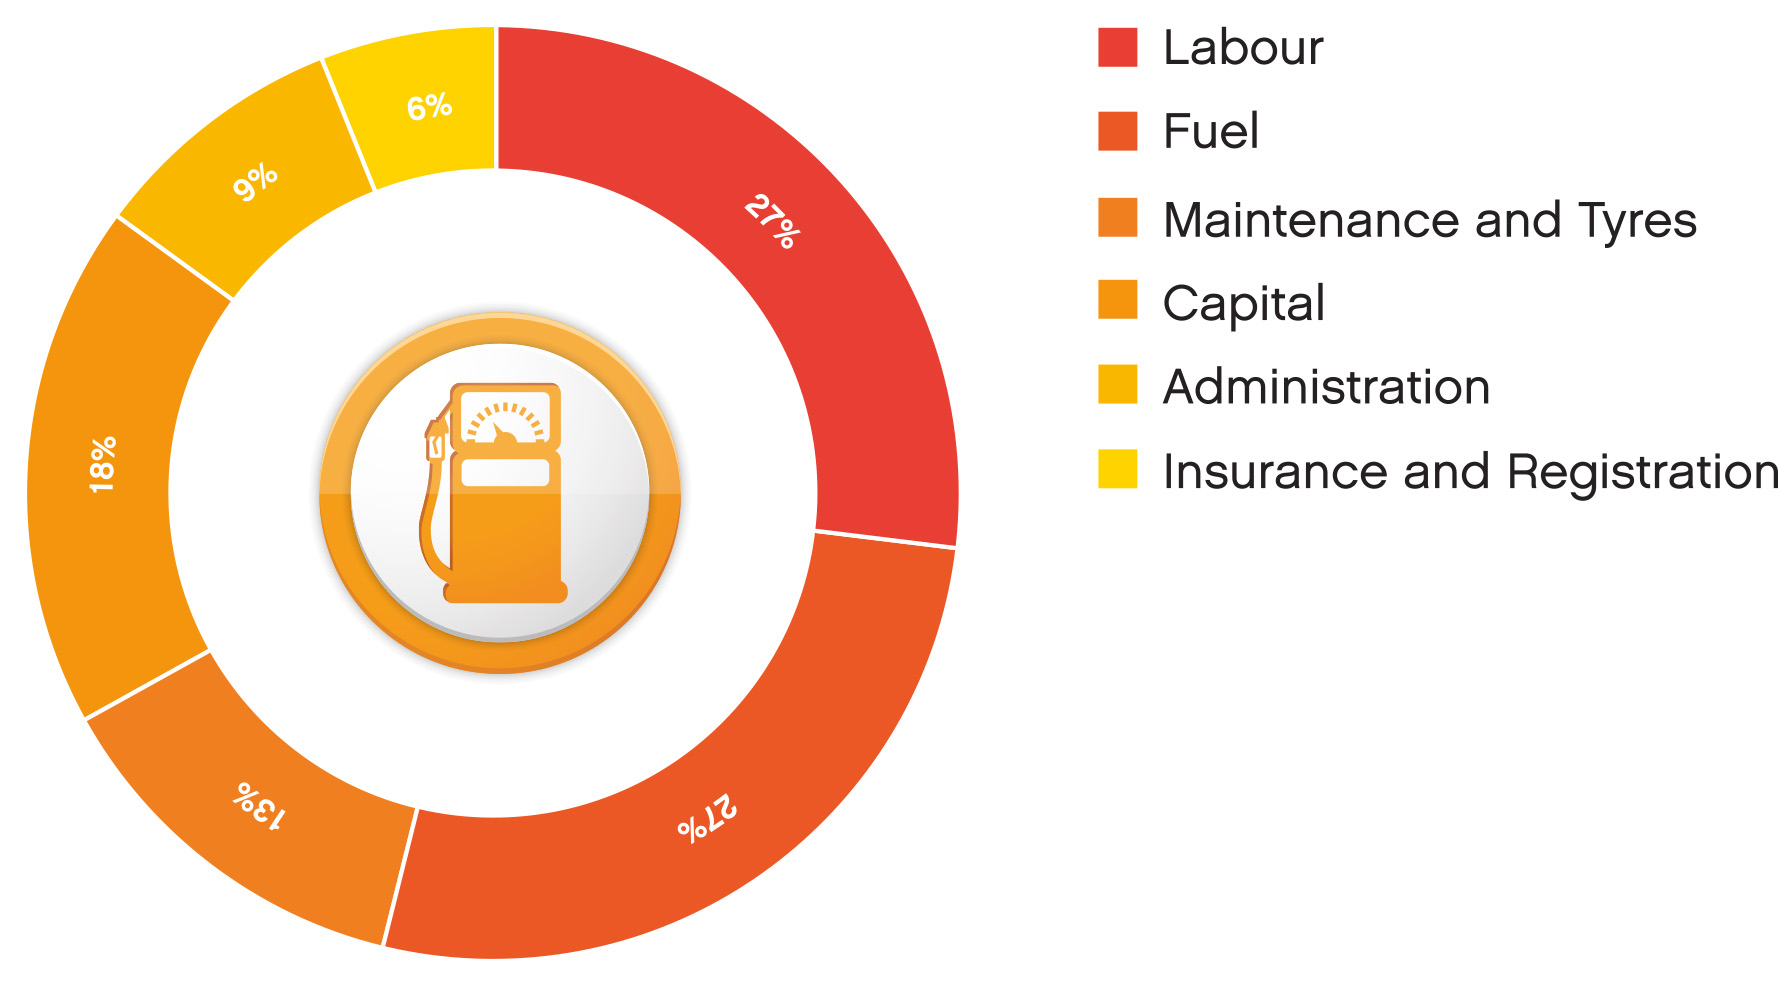 Highest costs chart for labour and fuel